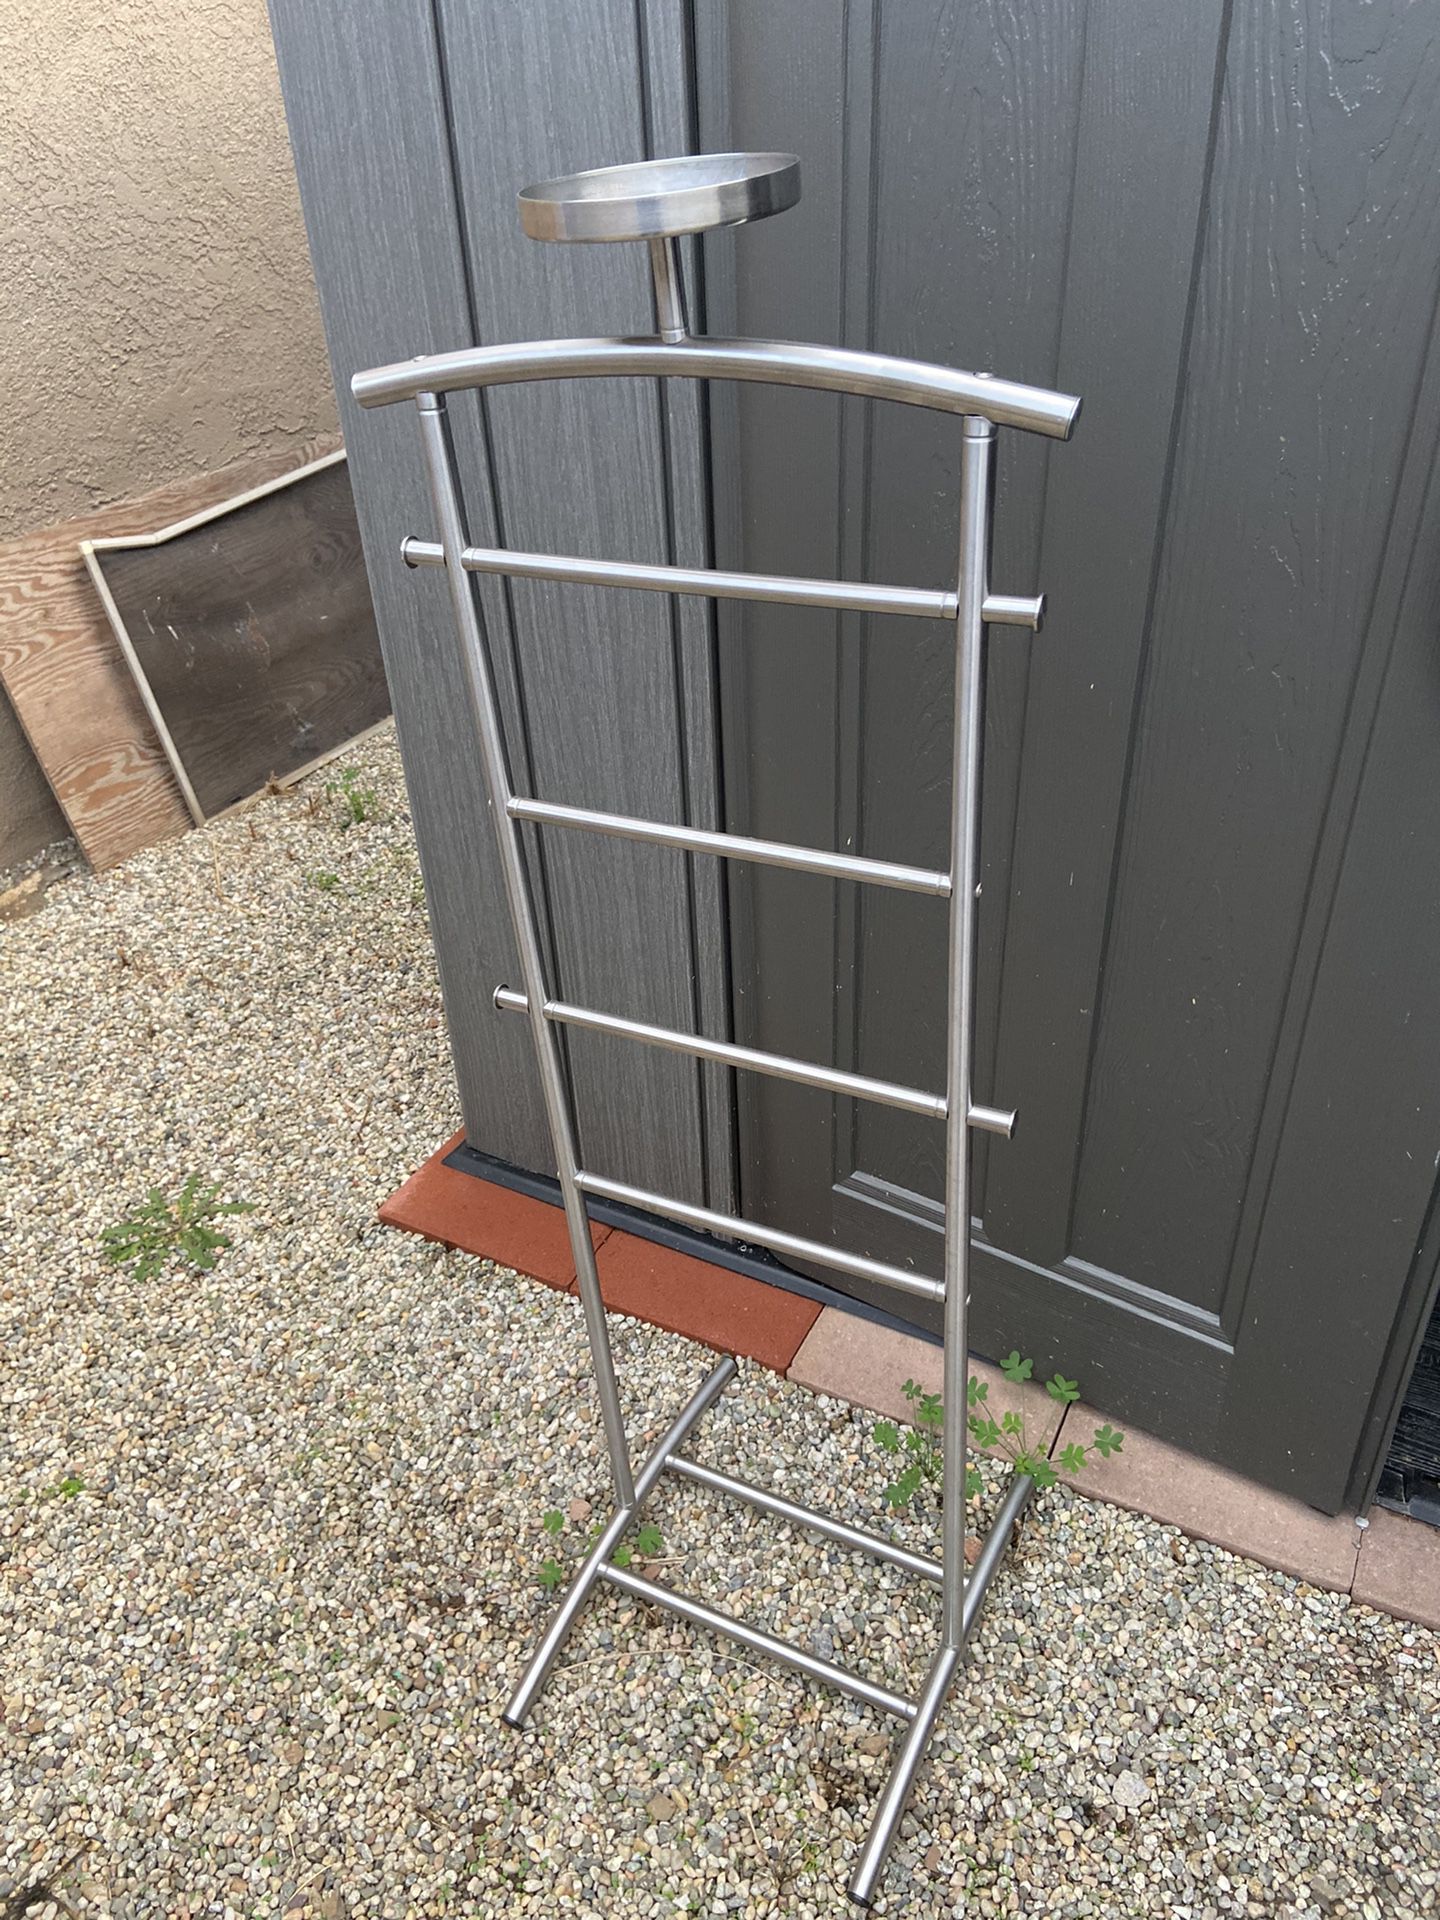 Valet clothing stand stainless steel / Perchero de acero for Sale in Corona, CA - OfferUp